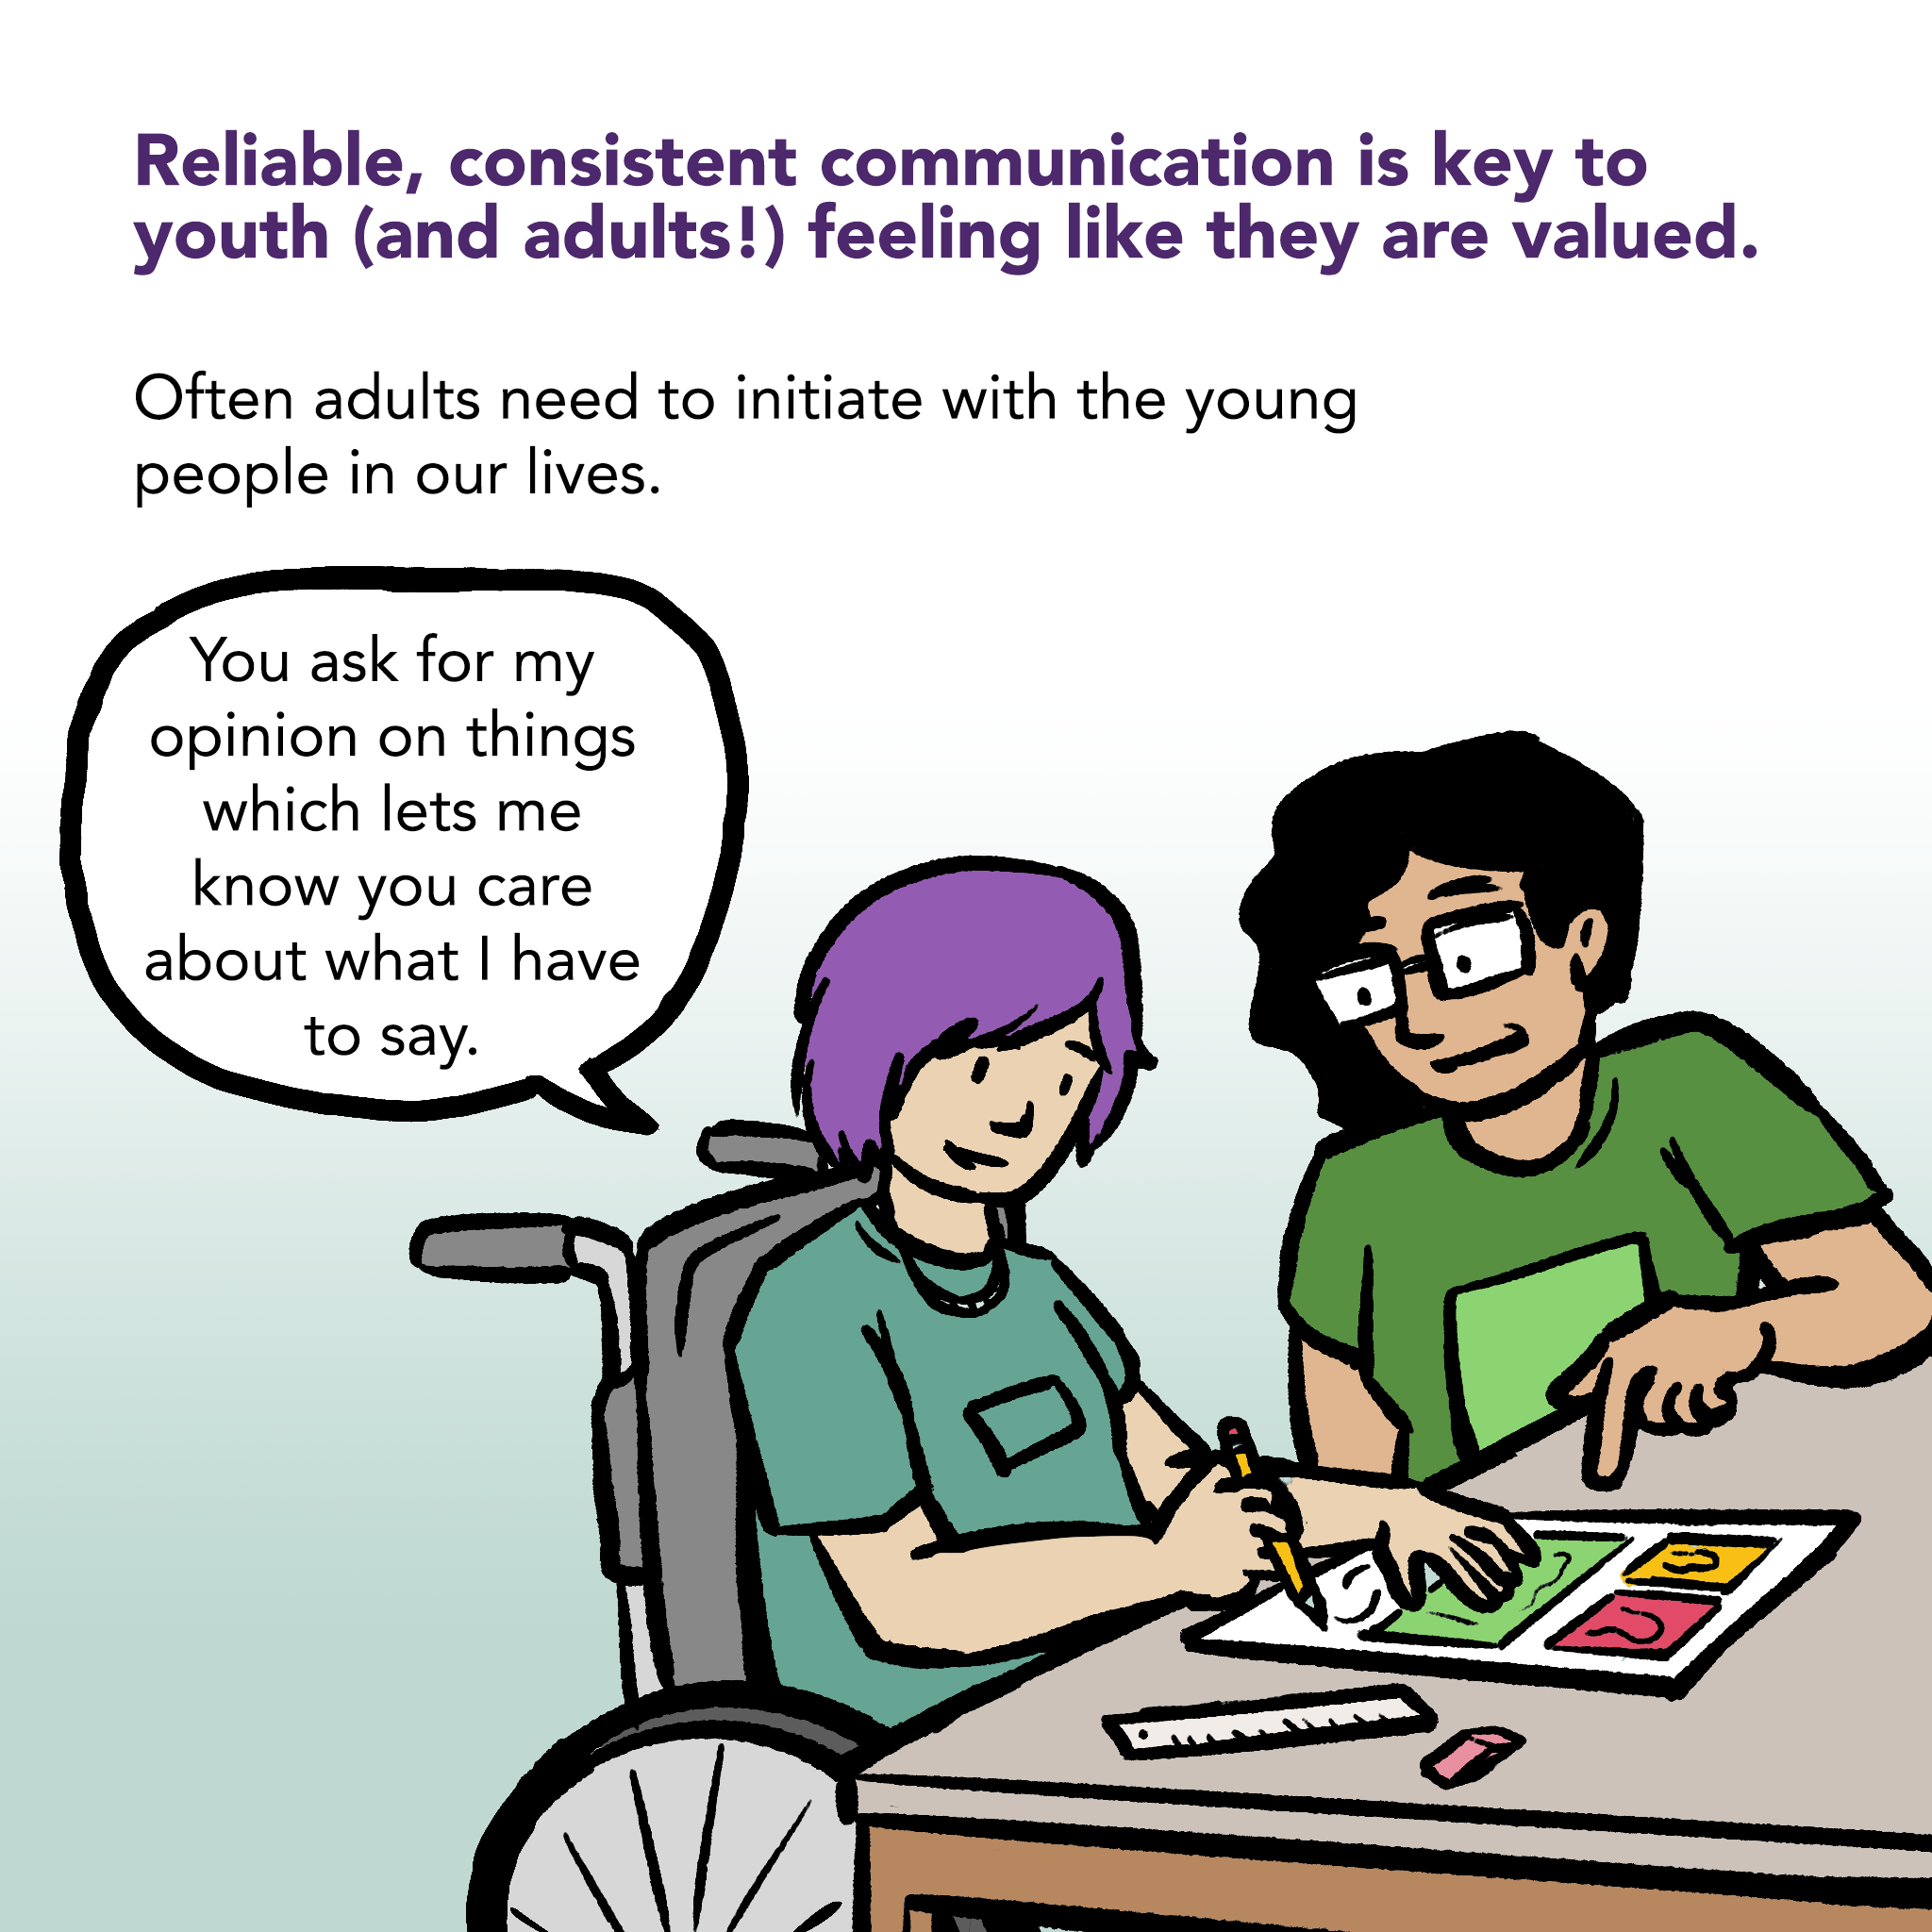 Illustration of an adult and a youth sitting at a table working on an a project. Caption says "Reliable, consistent communication is key to youth (and adults!) feeling like they are valued. Often adults need to initiate with the young people in our lives." Youth says "You ask for my opinion on things which lets me know you care about what I have to say."